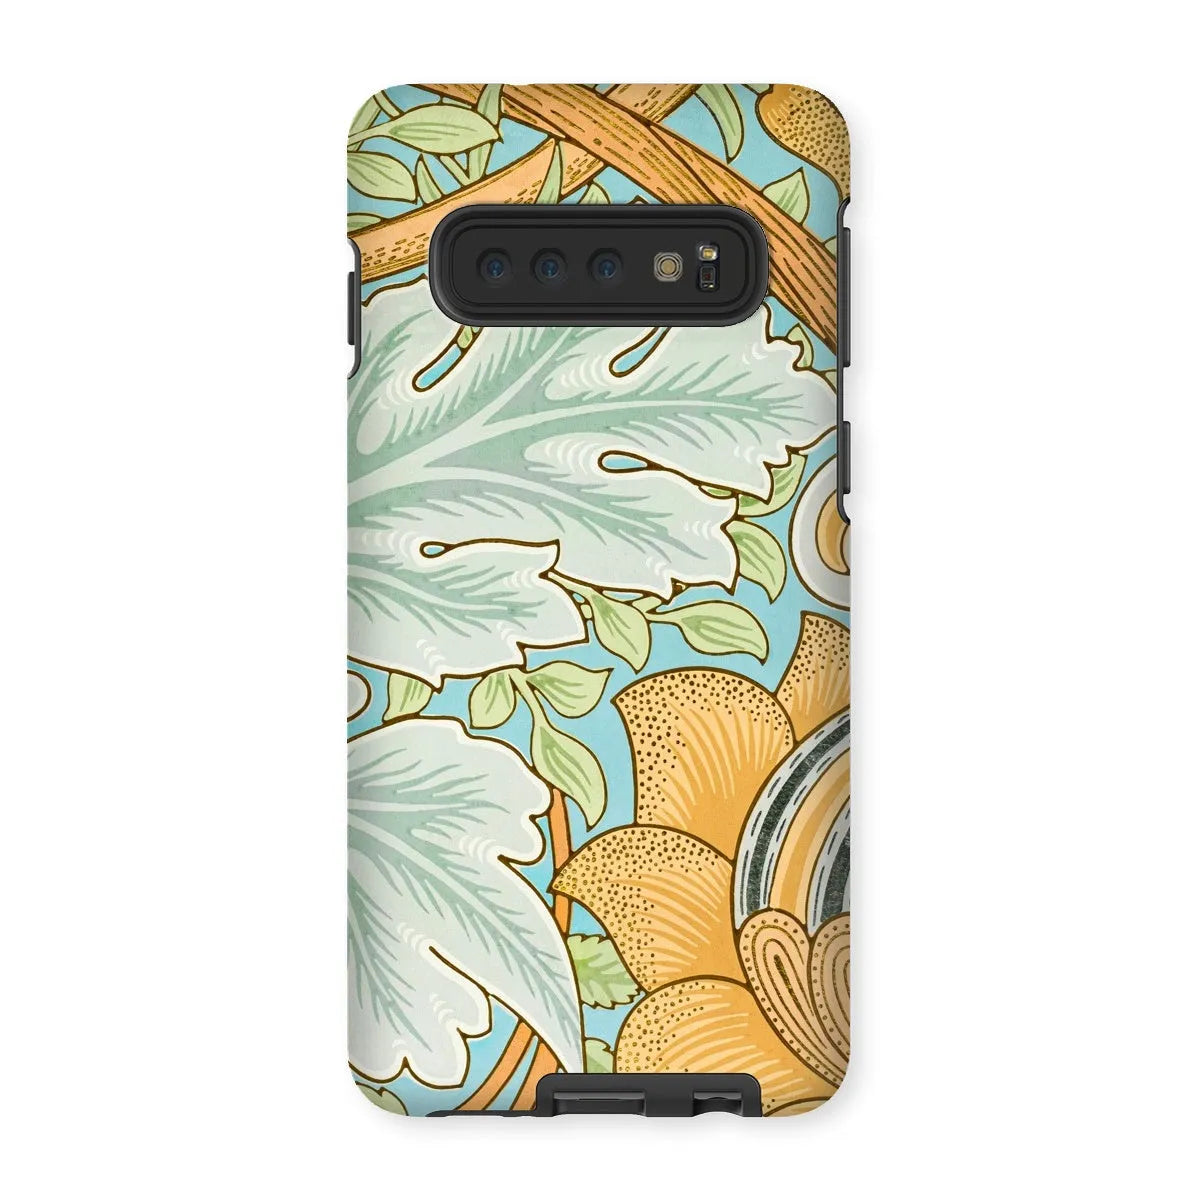 St. James - Arts And Crafts Phone Case - William Morris - Samsung Galaxy S10 / Matte - Mobile Phone Cases - Aesthetic